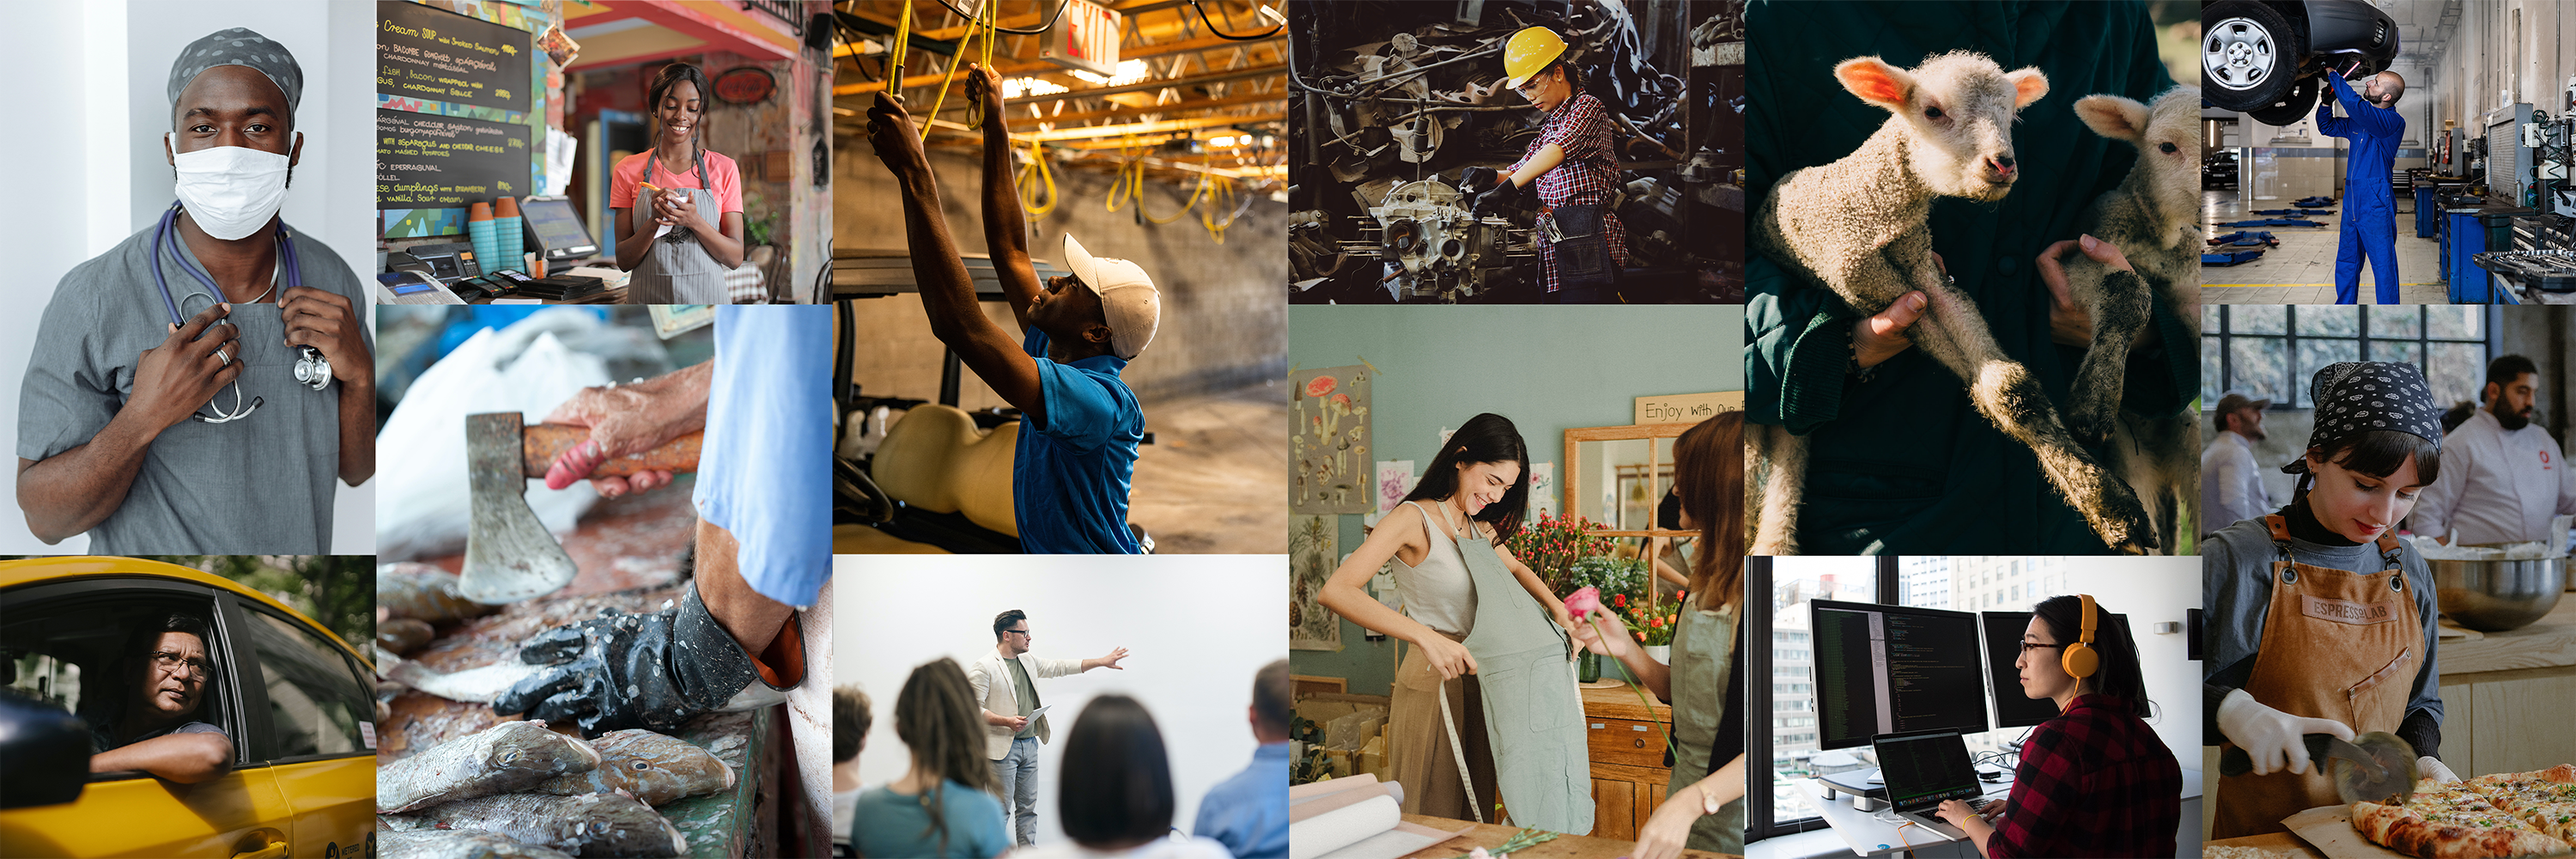 A collage of photos showing diversity in work life. Source: Pexels.